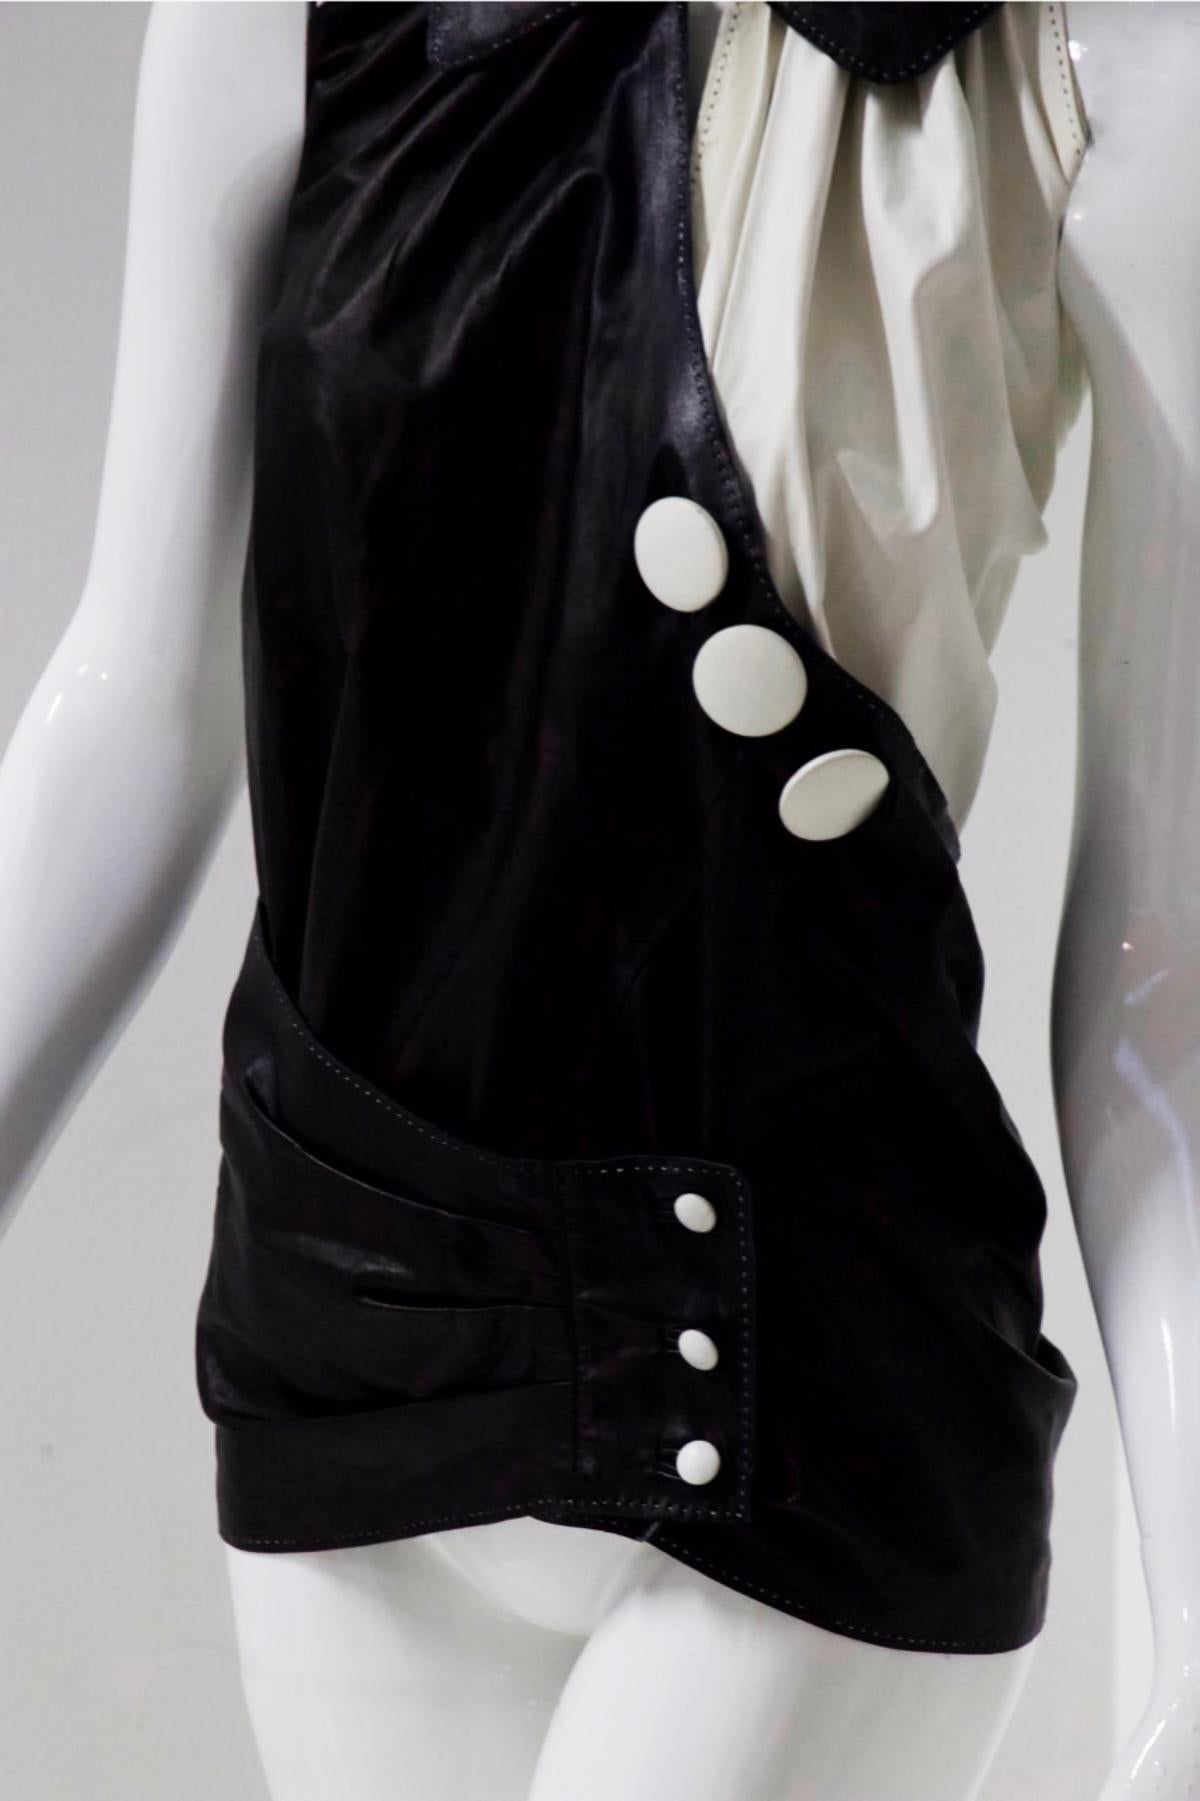 Beautiful white semi-leather and black viscose blouse designed and made by Antonio Marras in the 1980s. The blouse is very particular, in fact it is divided in two by the two main colours: black and white. We see a collar of a blouse that fastens